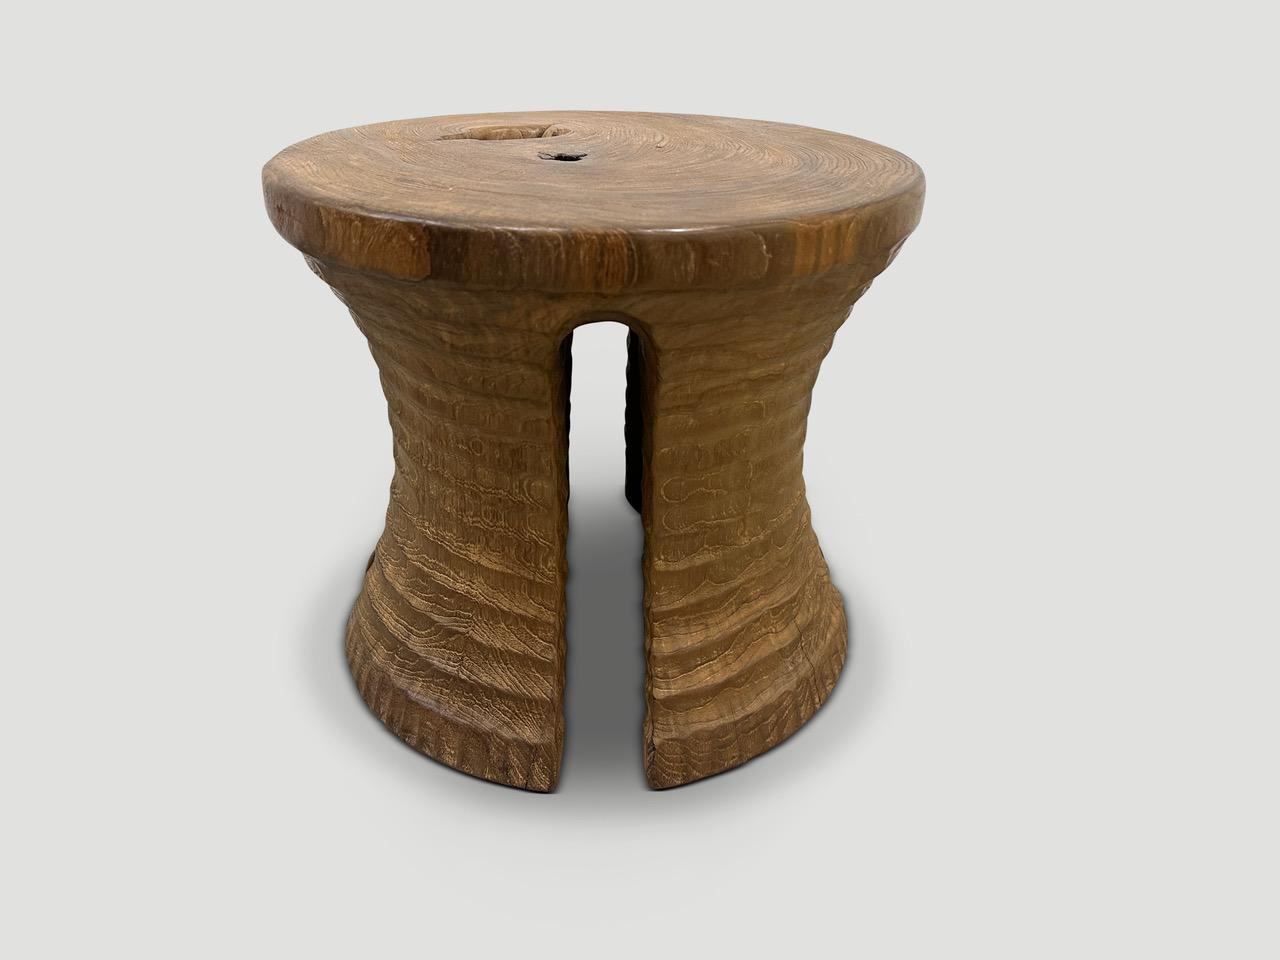 A century old teak wood mortar originally used to grind rice, is repurposed into this minimalist side table or stool. Part of the Mid Century Couture Collection, featuring our unique minimalist carving. We first turned this ancient piece upside down